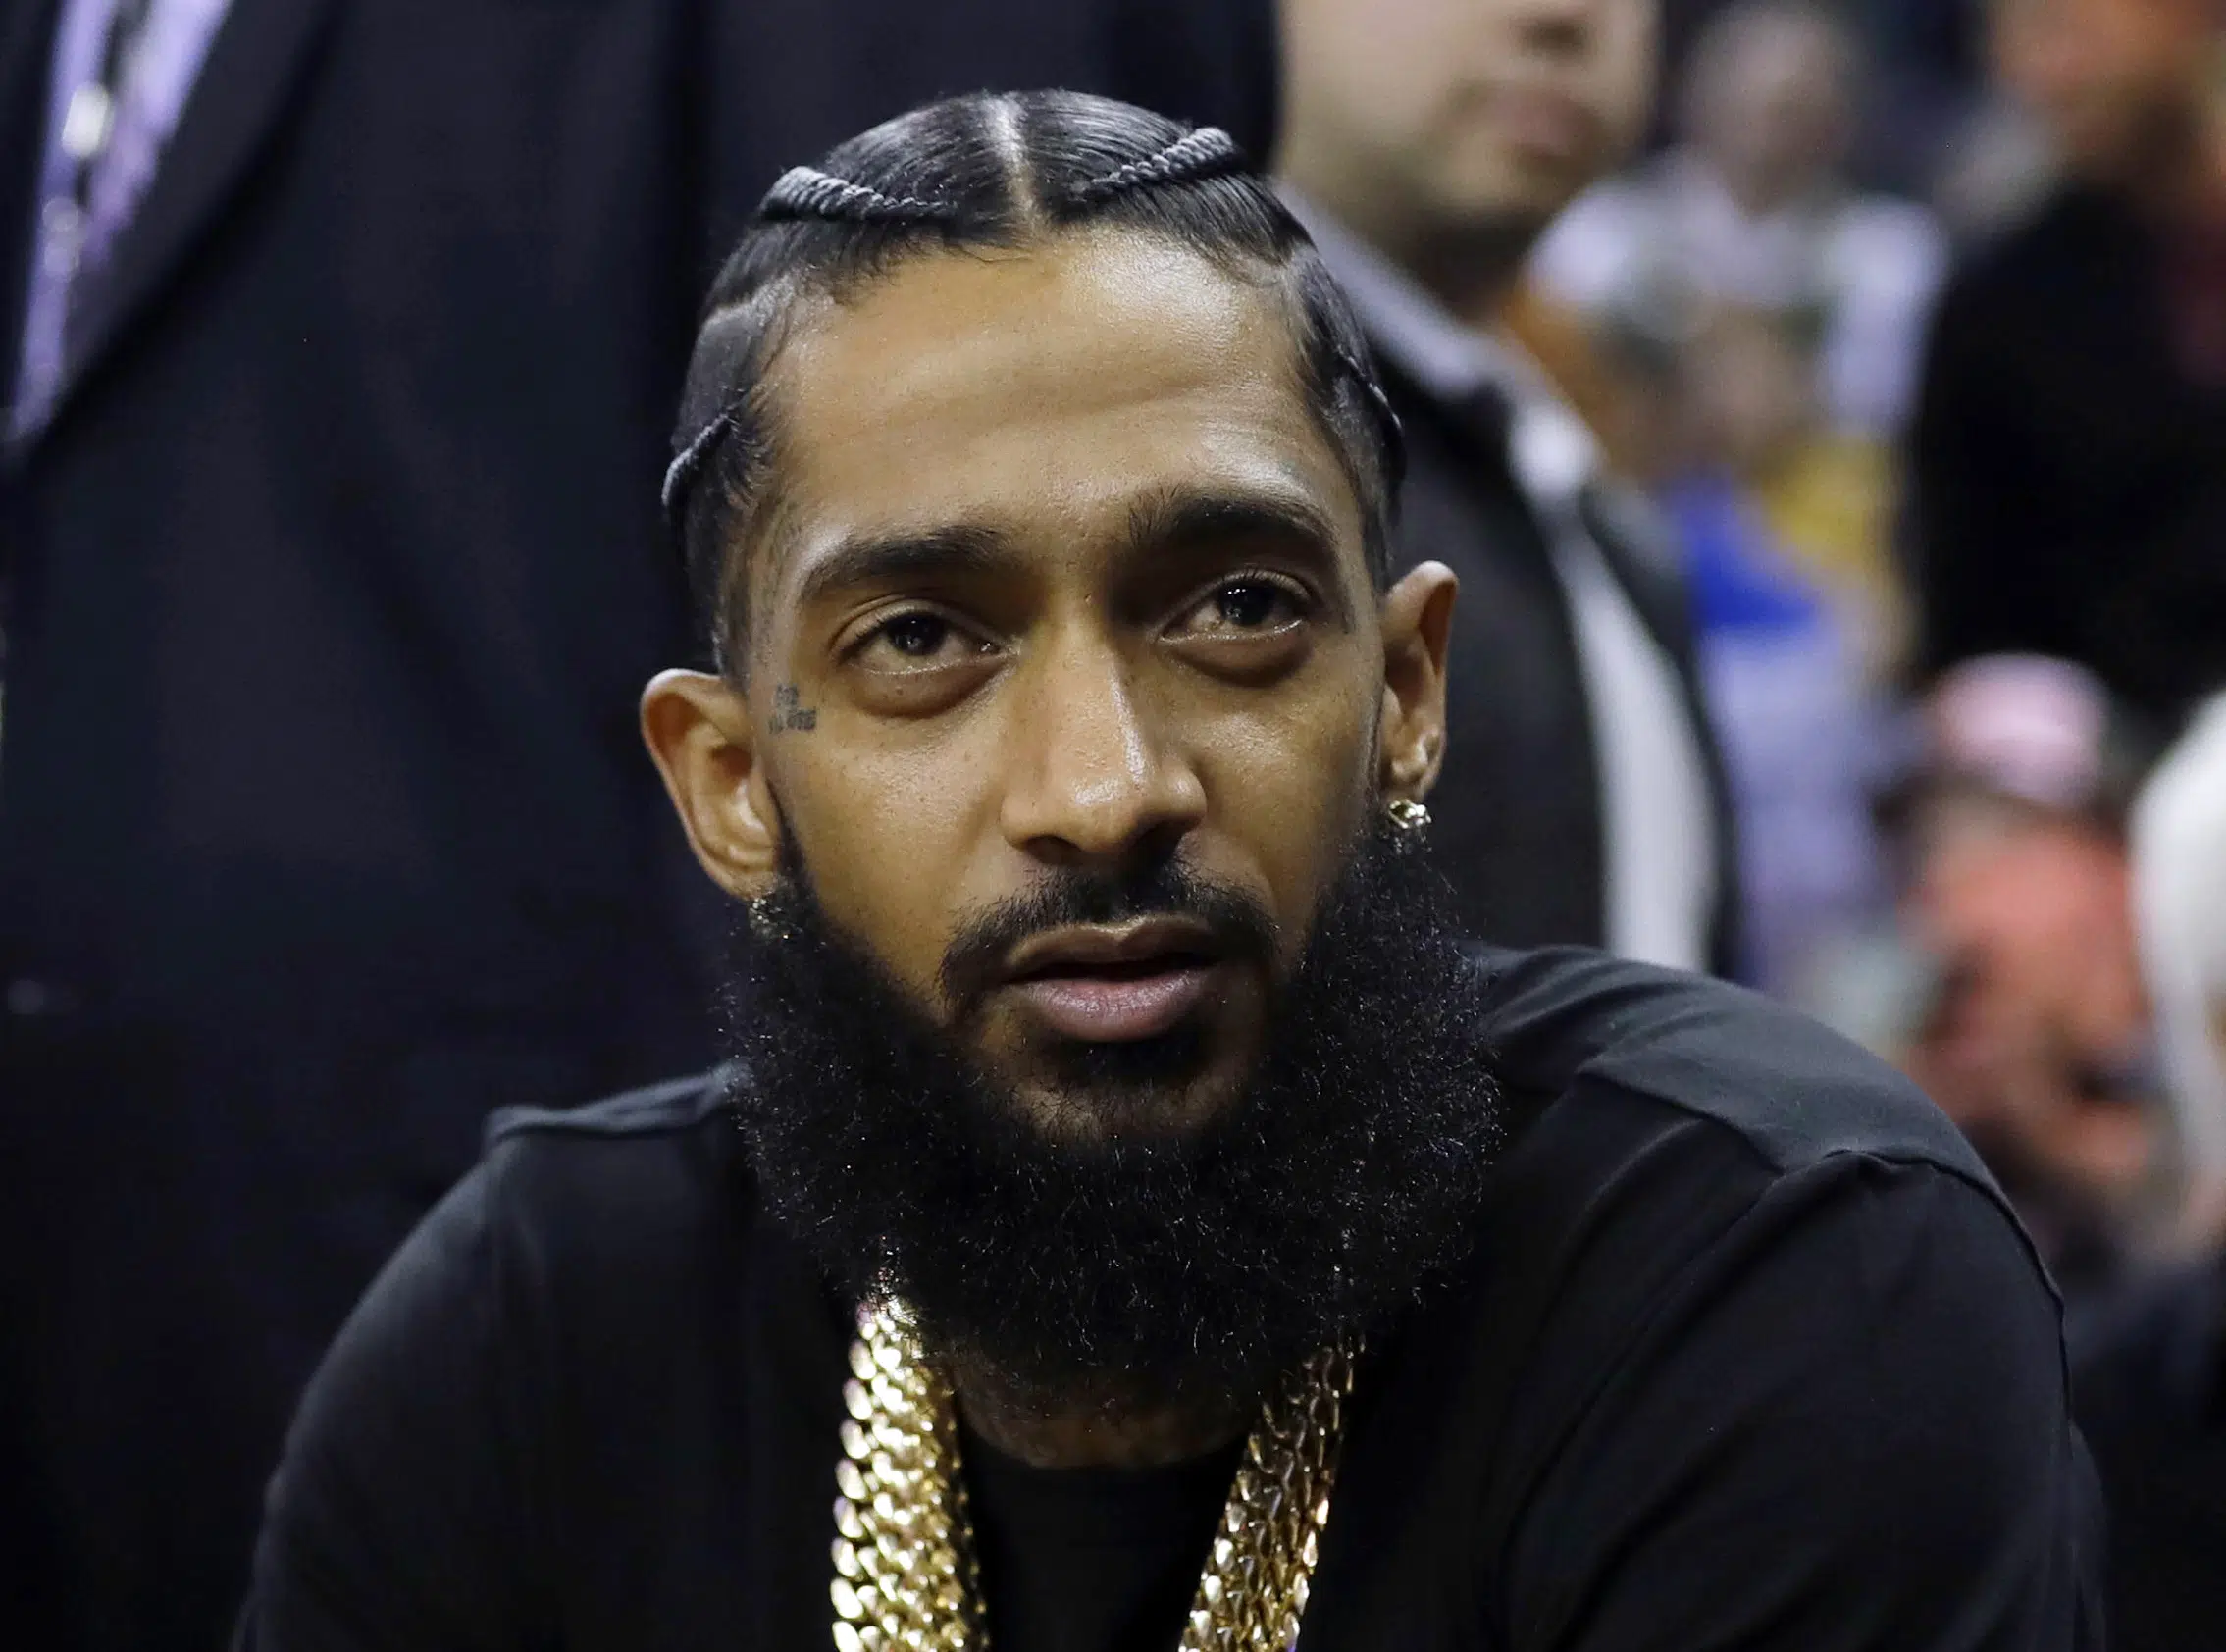 The murderer of Nipsey Hussle was sentenced to life in prison for 60 years